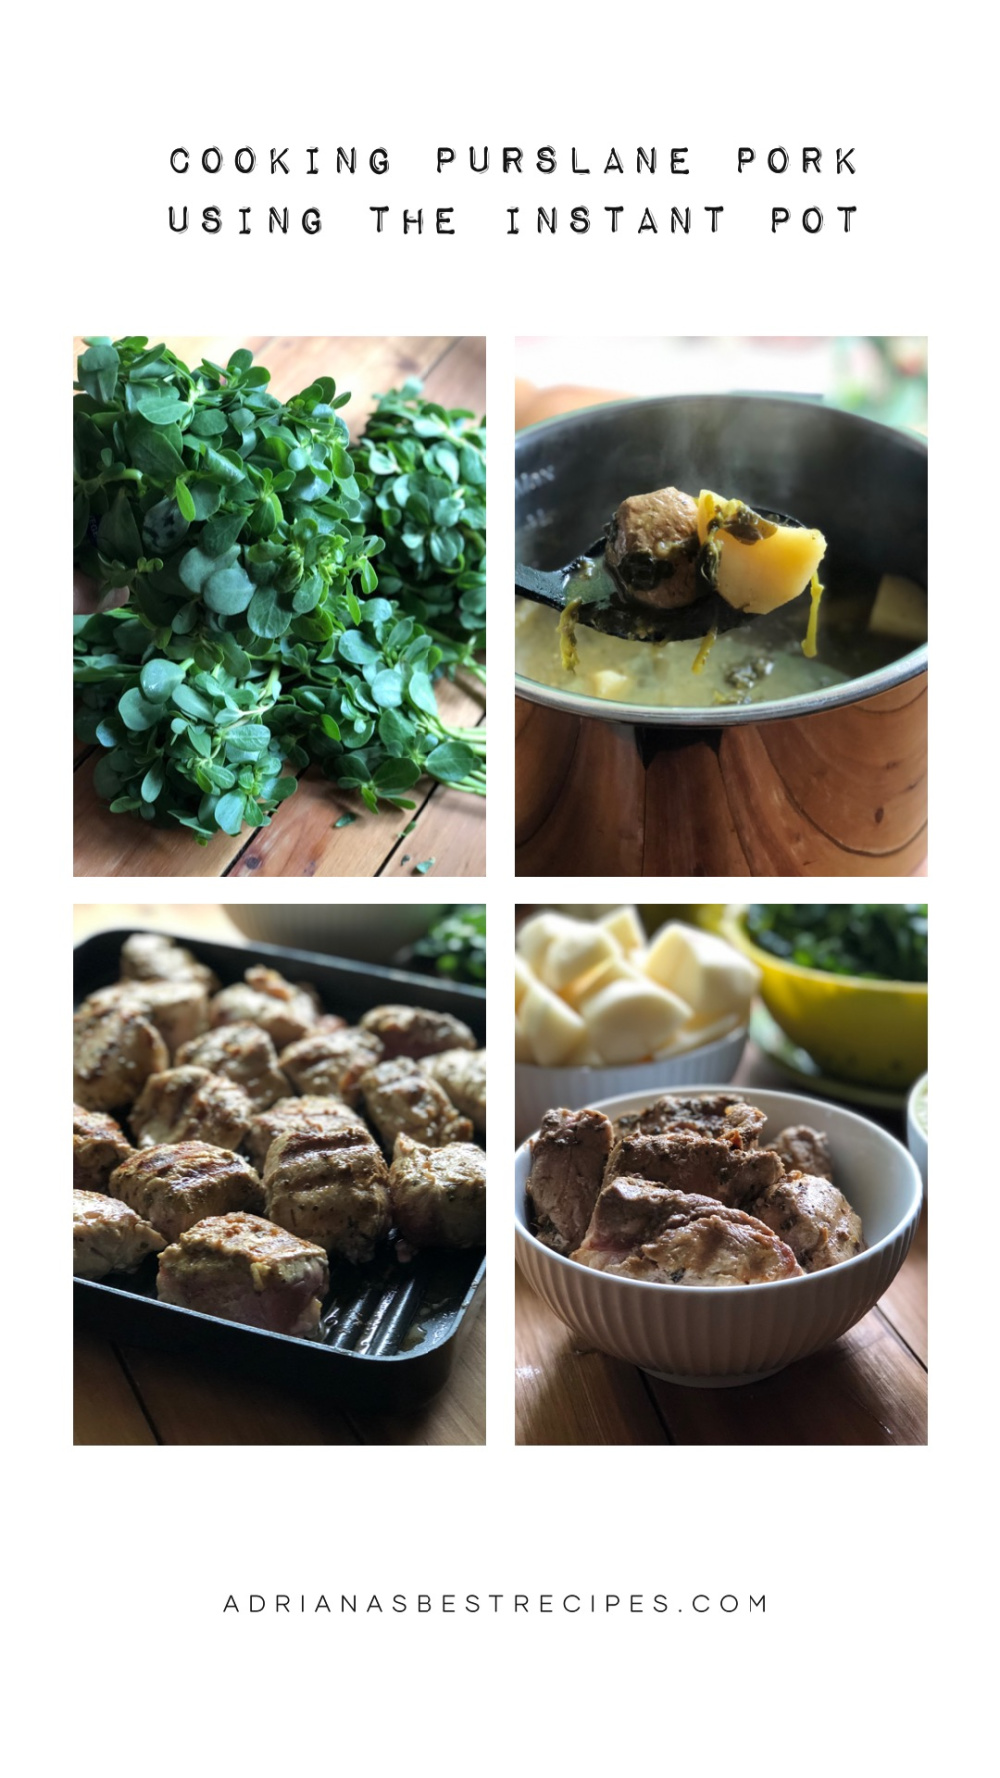 cooking the purslane pork stew using the Instant Pot